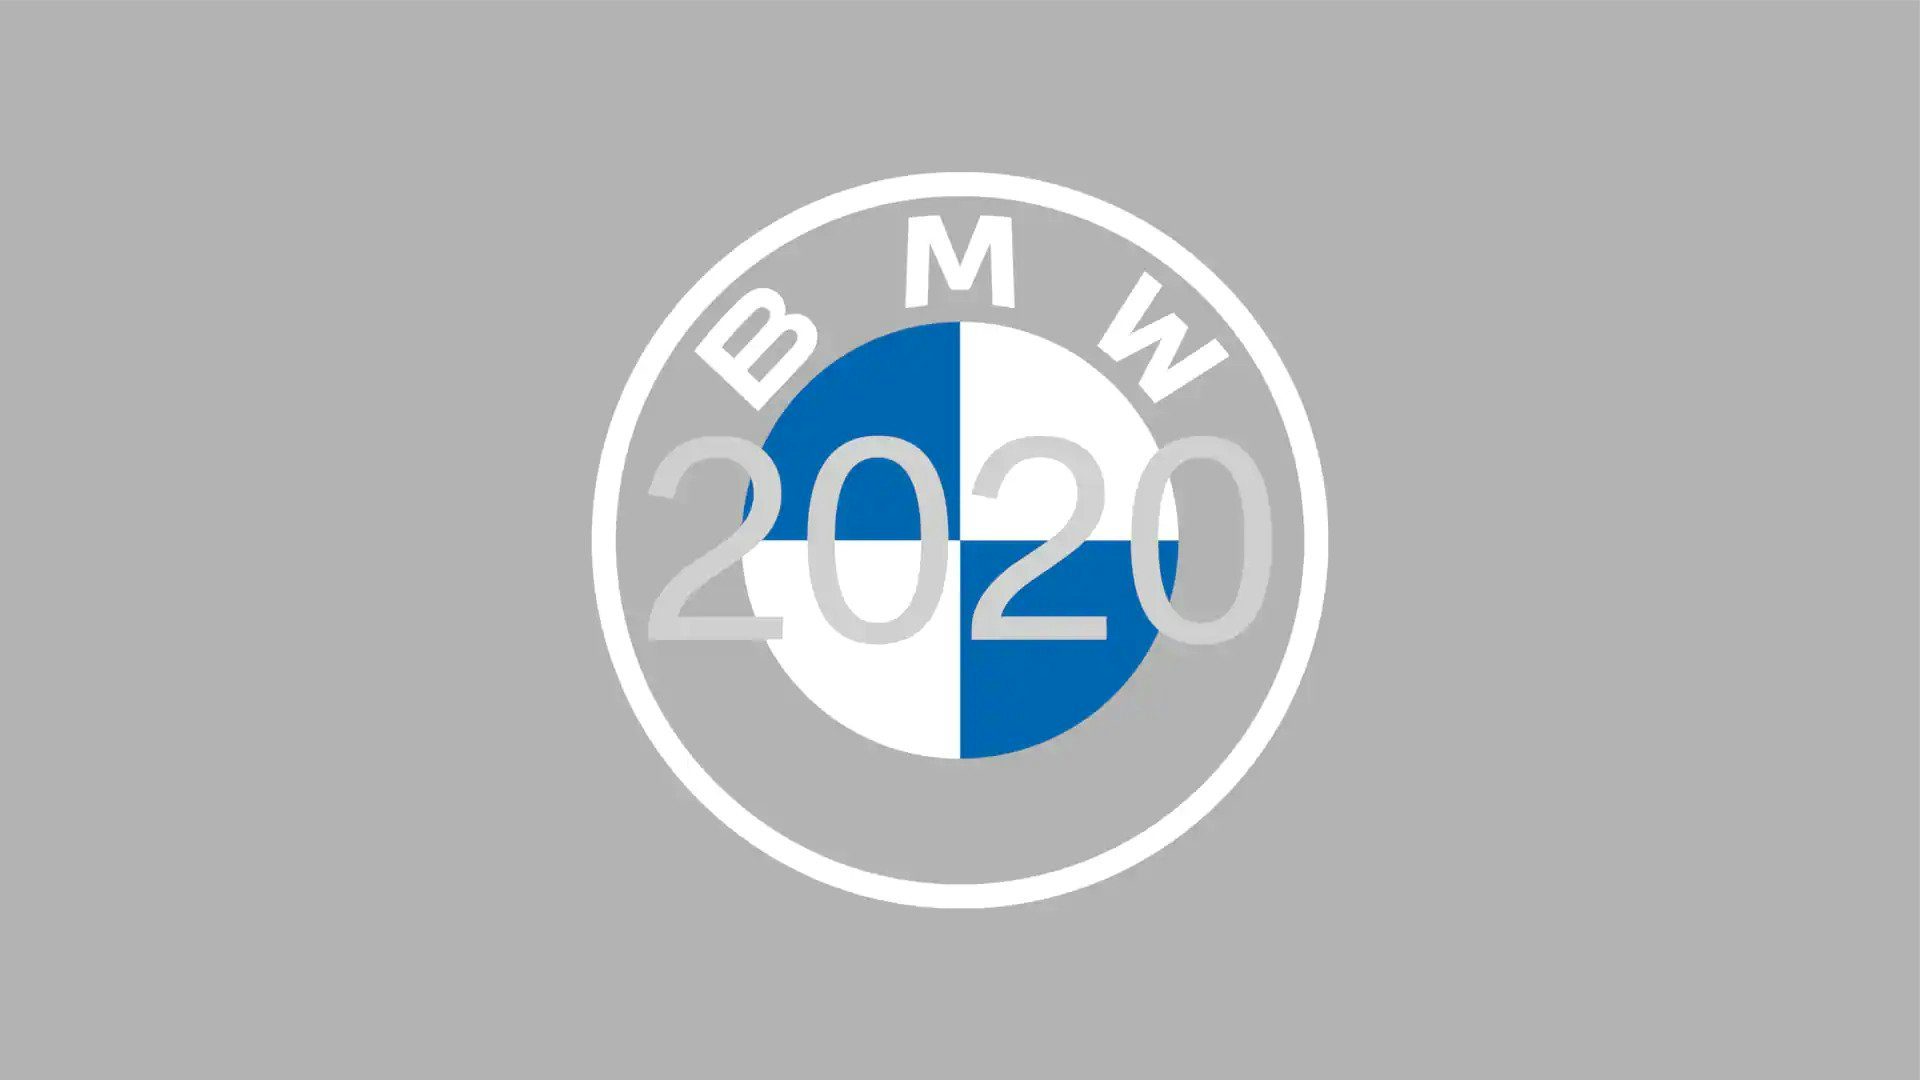 BMW delves into history as it unveils first new logo since 1997